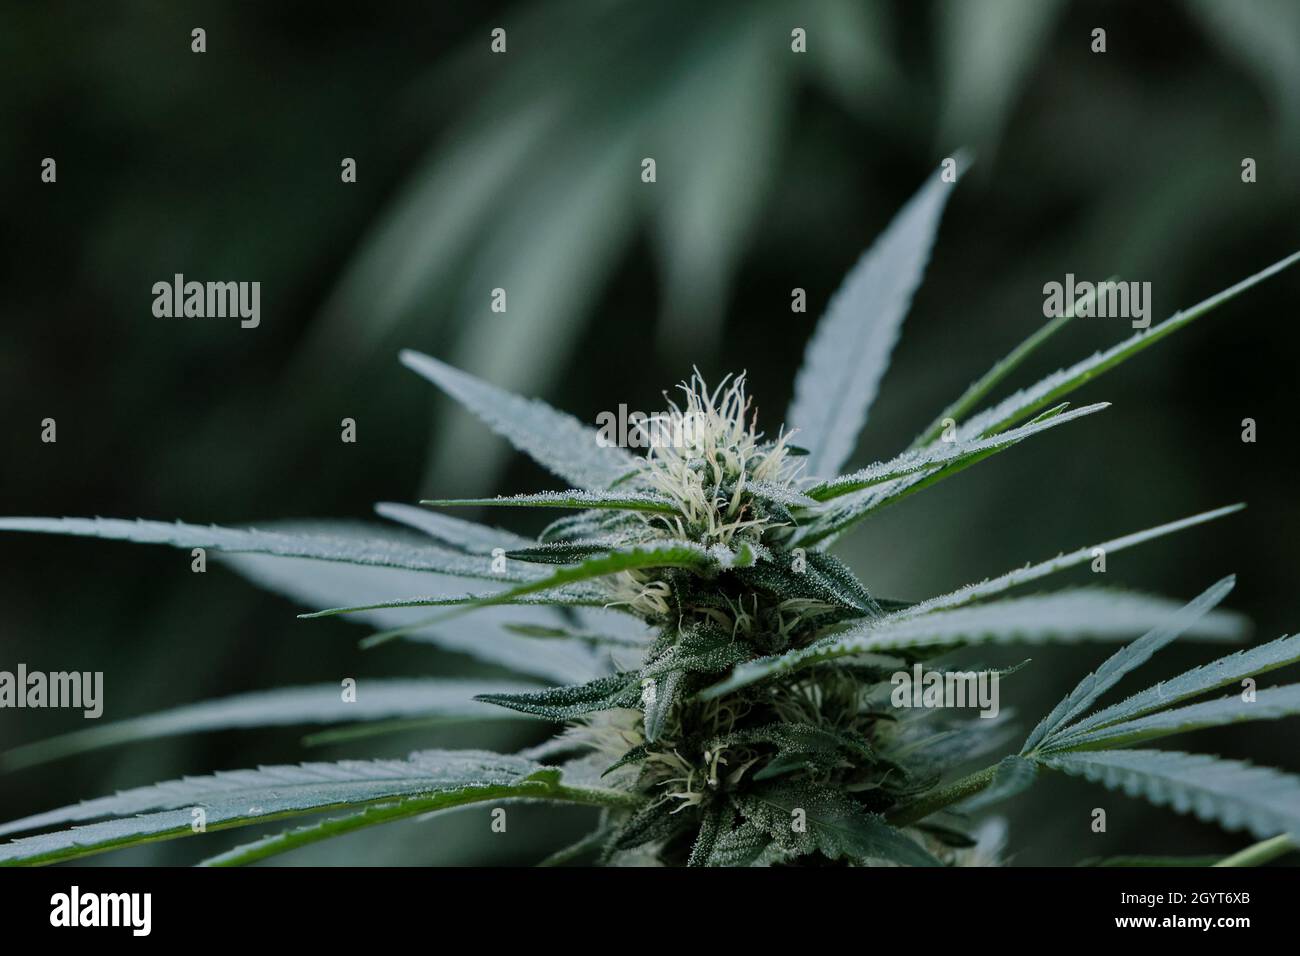 Cannabis sativa plant female flowers blooming close up Stock Photo